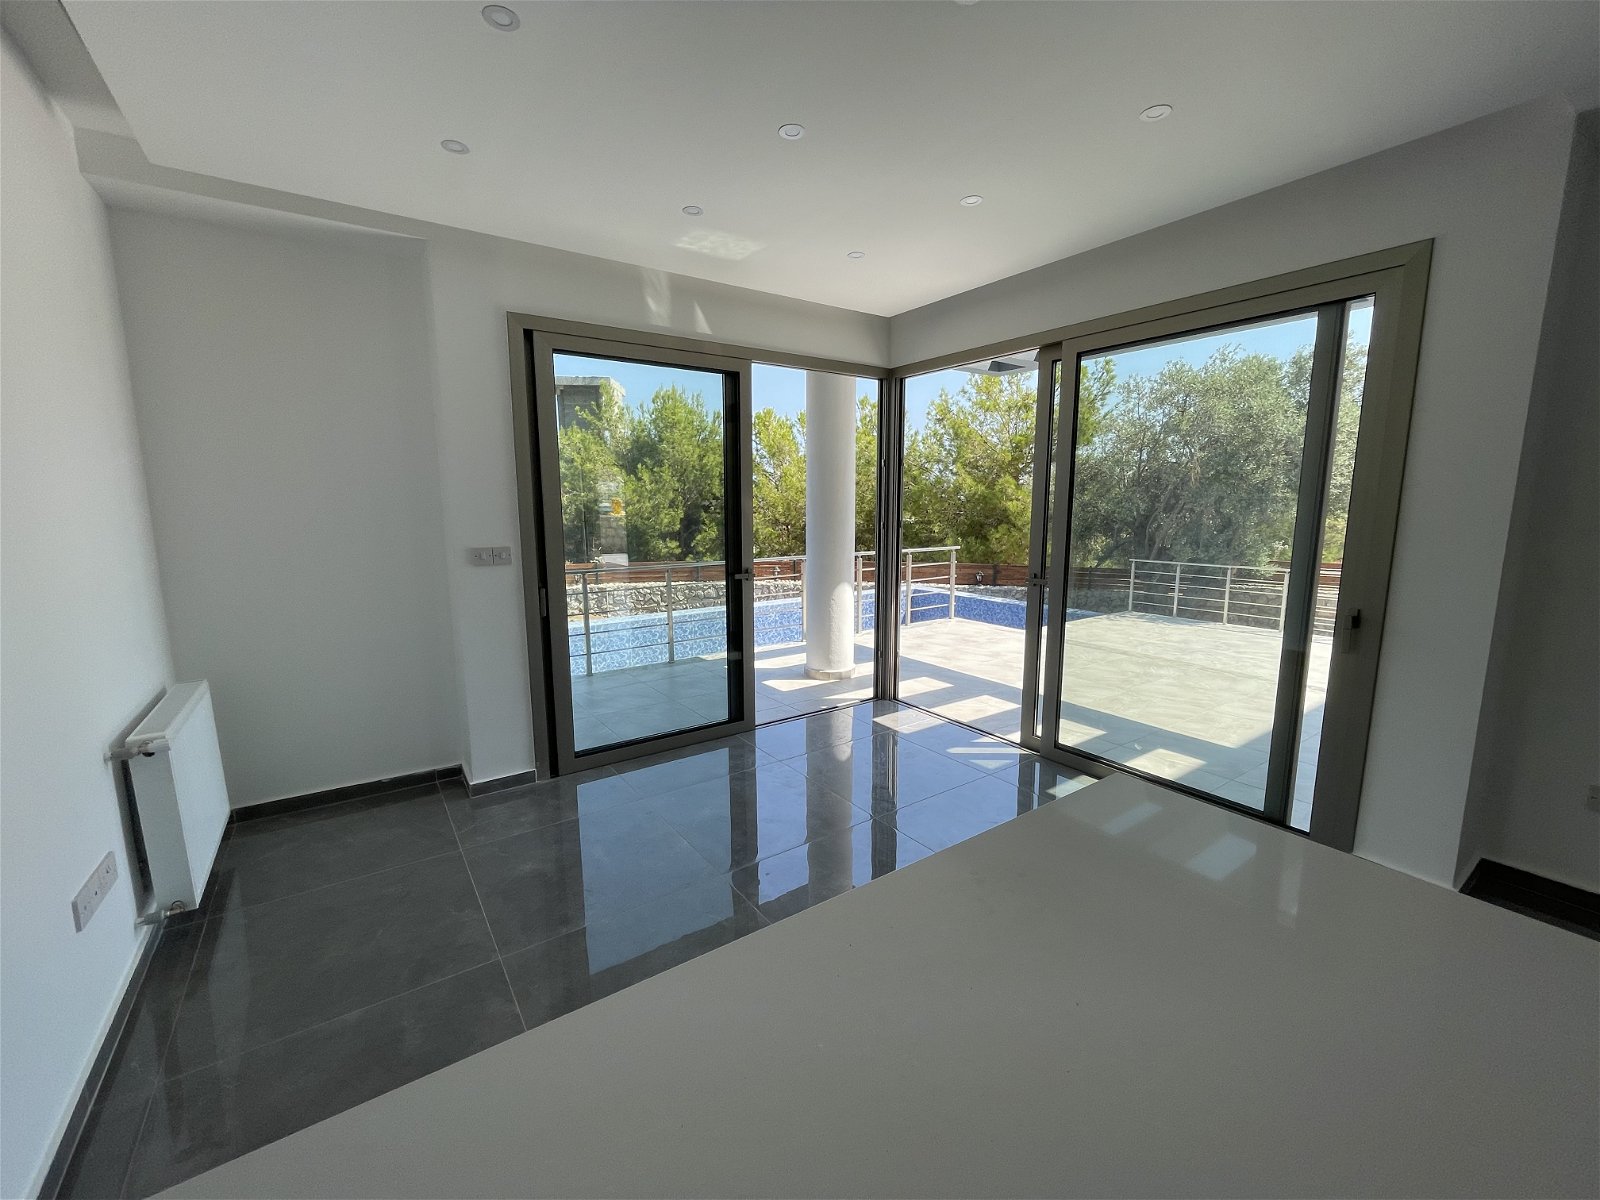 Stunning 3+1 Modern Villa with Sea and Mountain Views in Catalkoy, Kyrenia-12c53f1d-054c-4208-960a-014bb59664a9